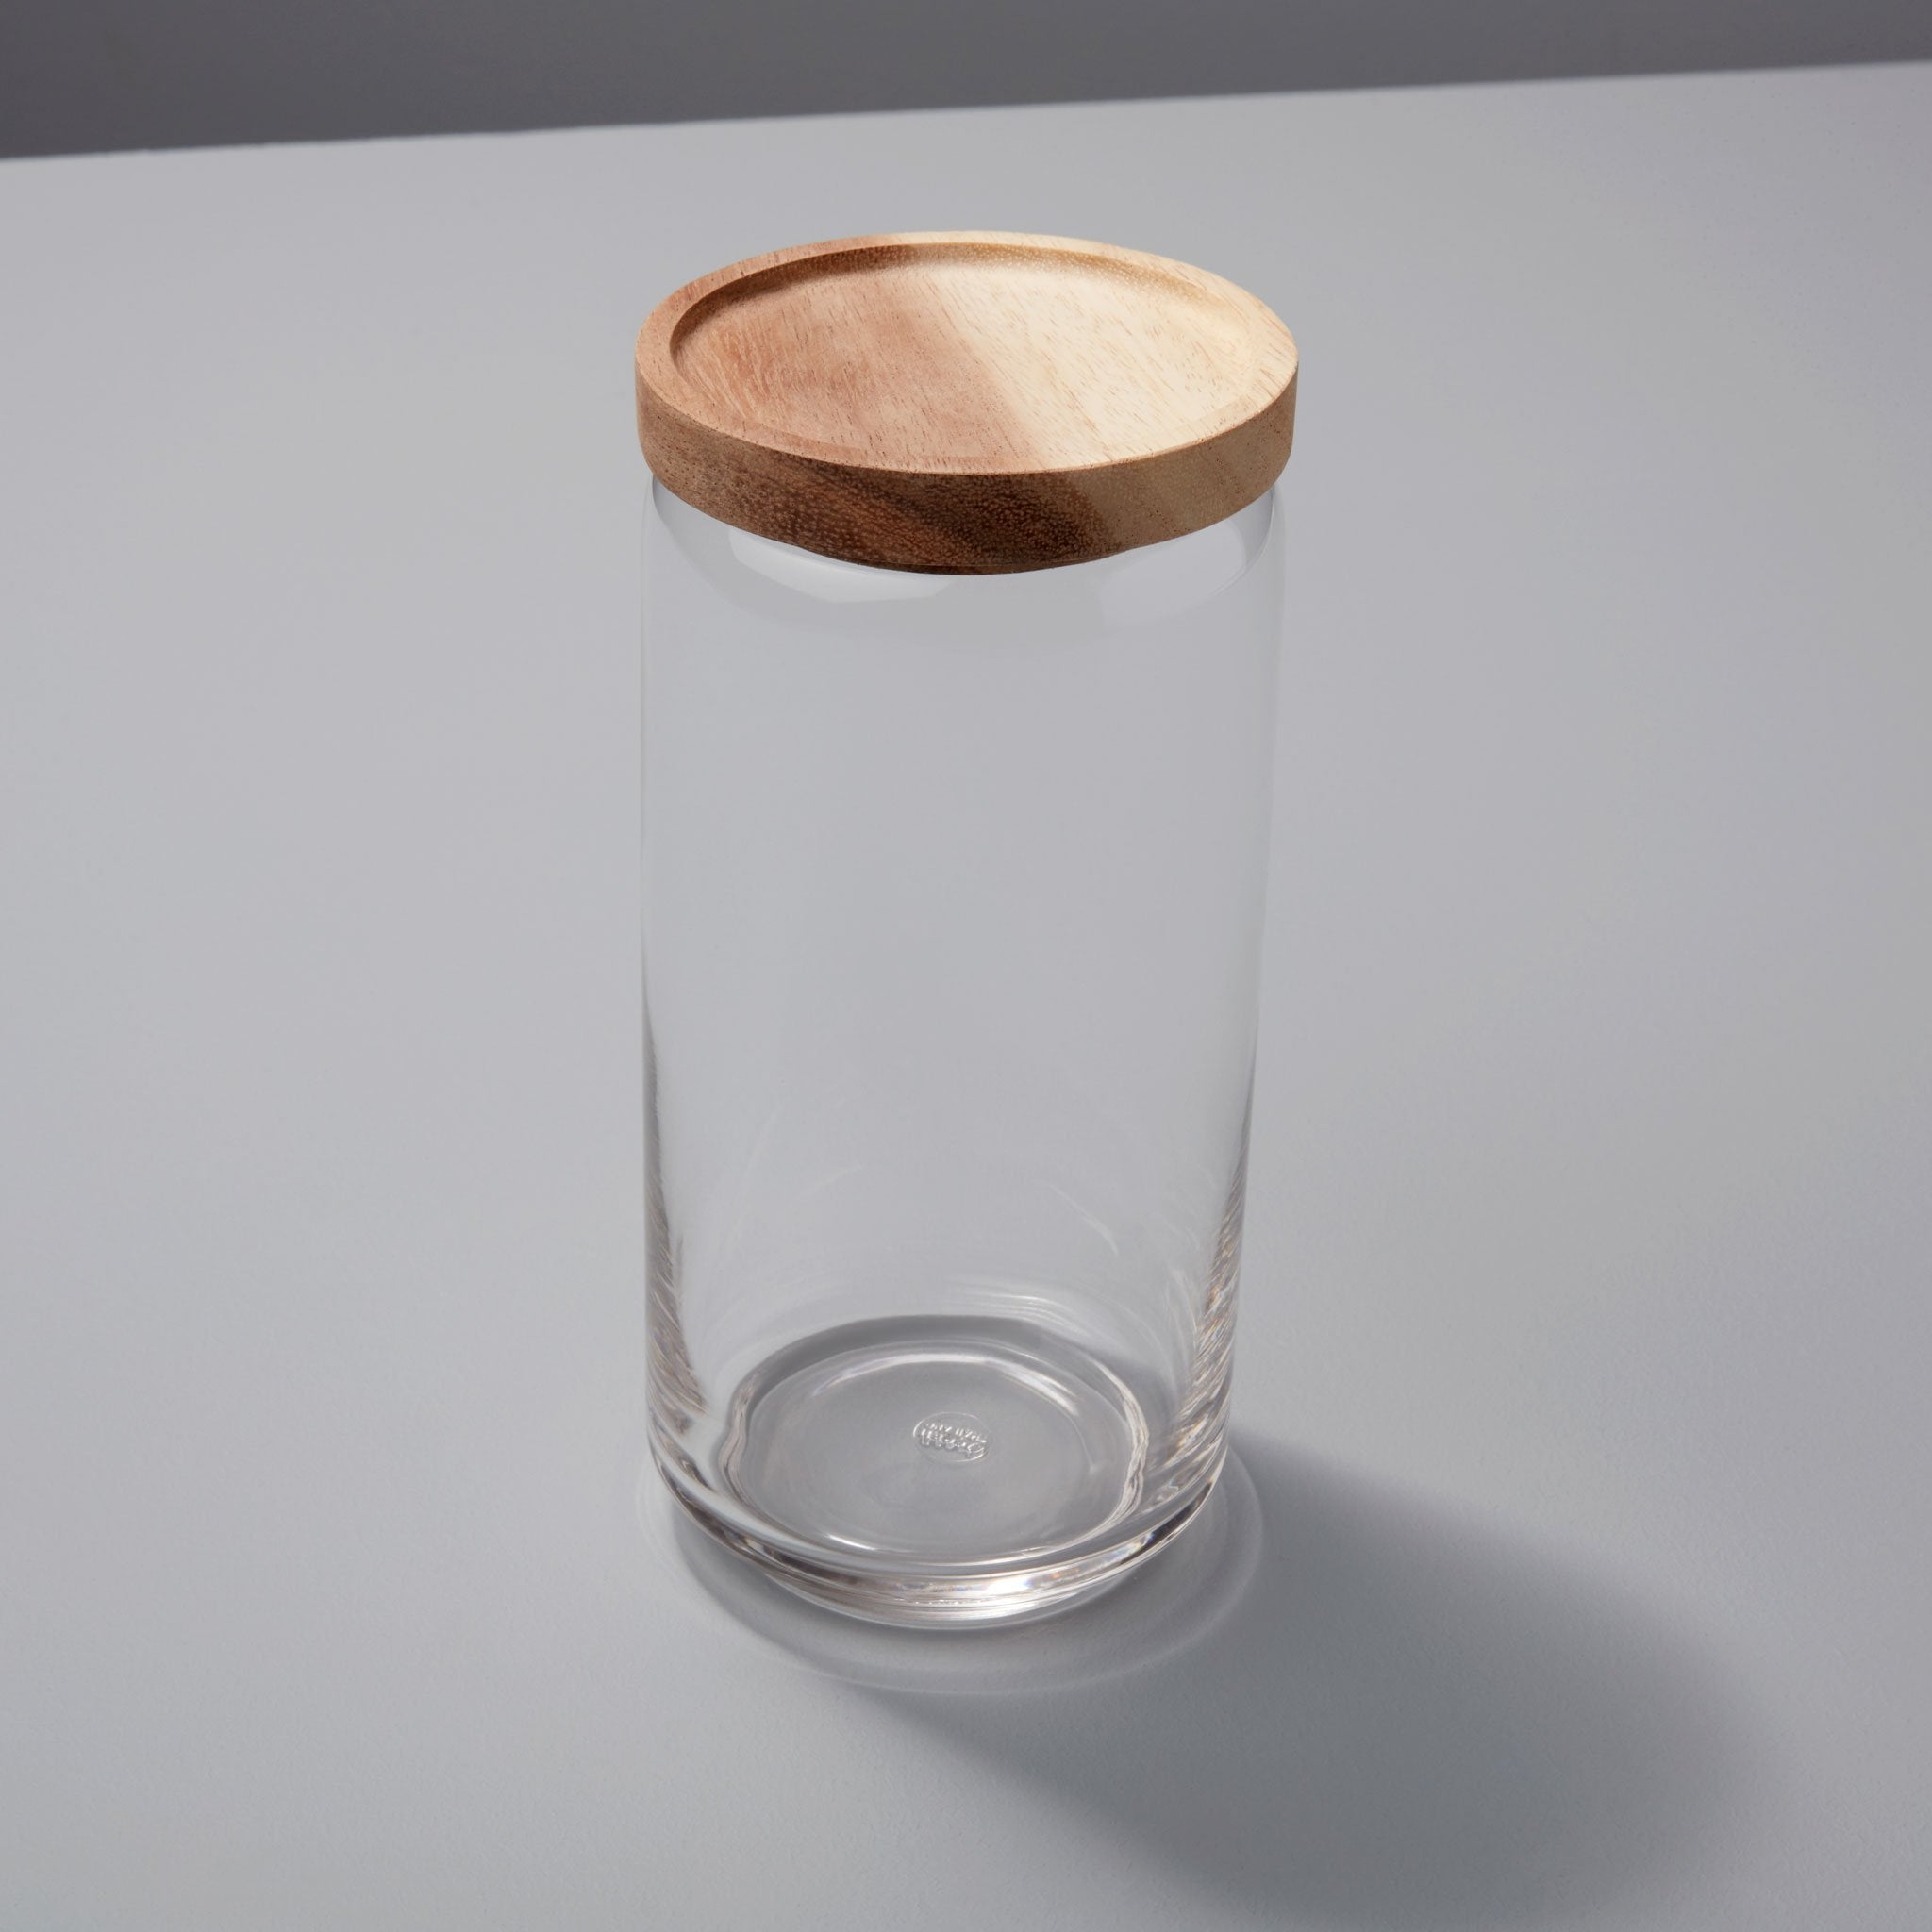 https://behome.com/cdn/shop/products/Be-Home_Glass-Container-with-Acacia-Lid-Large_41-590_5c737f8c-a6cf-4e16-8d4d-2ba1b669afe7.jpg?v=1669237704&width=3840